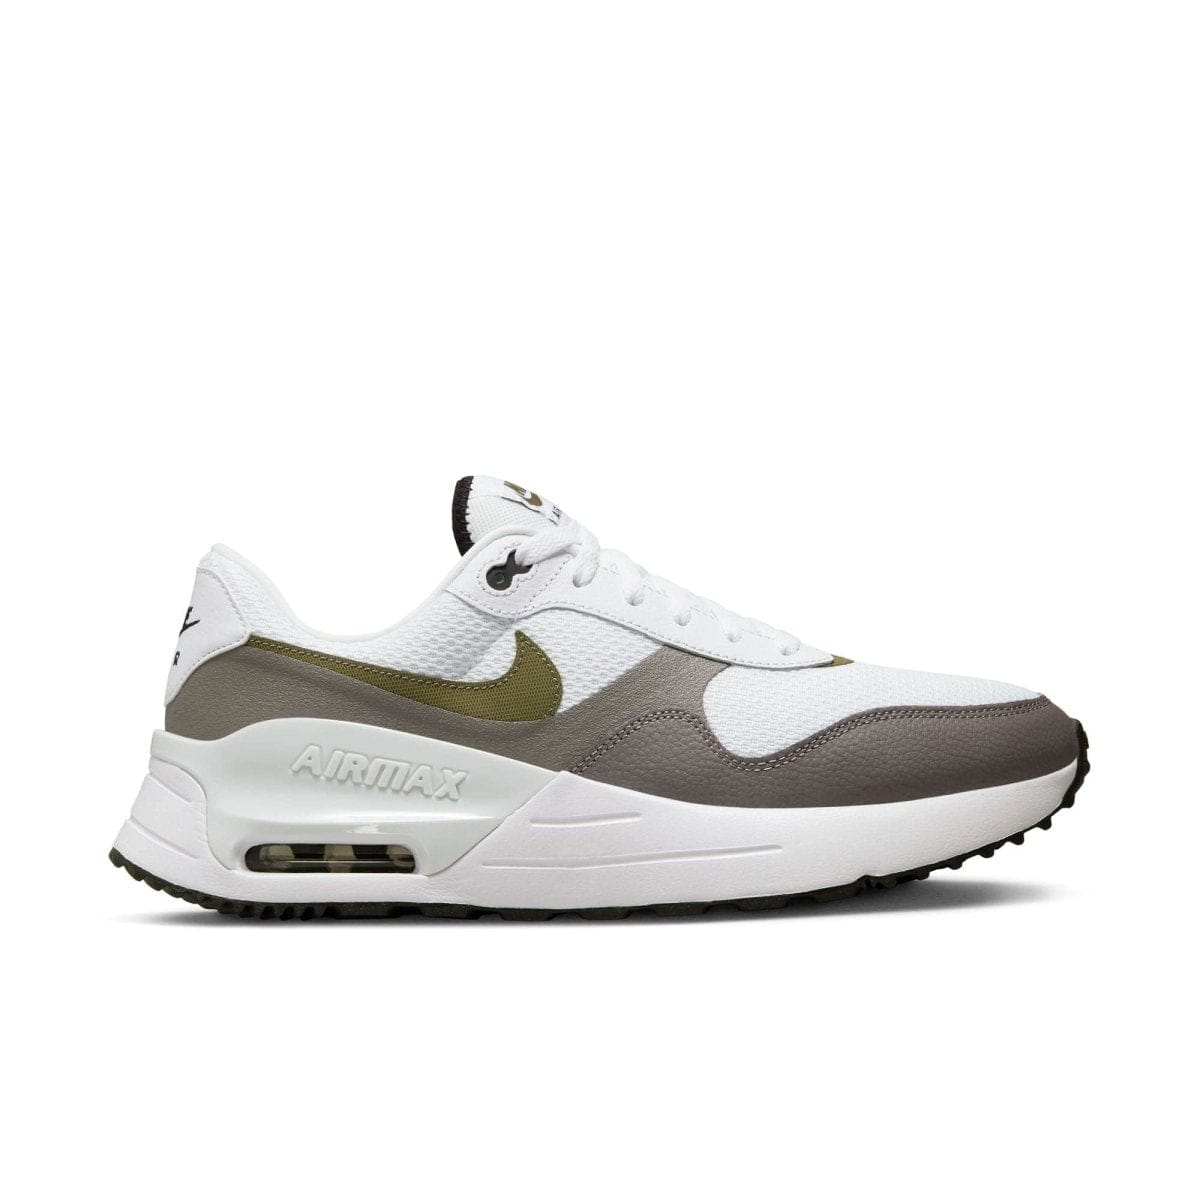 Nike NIKE MEN'S AIR MAX SYSTM OLIVE/WHITE SHOES - INSPORT